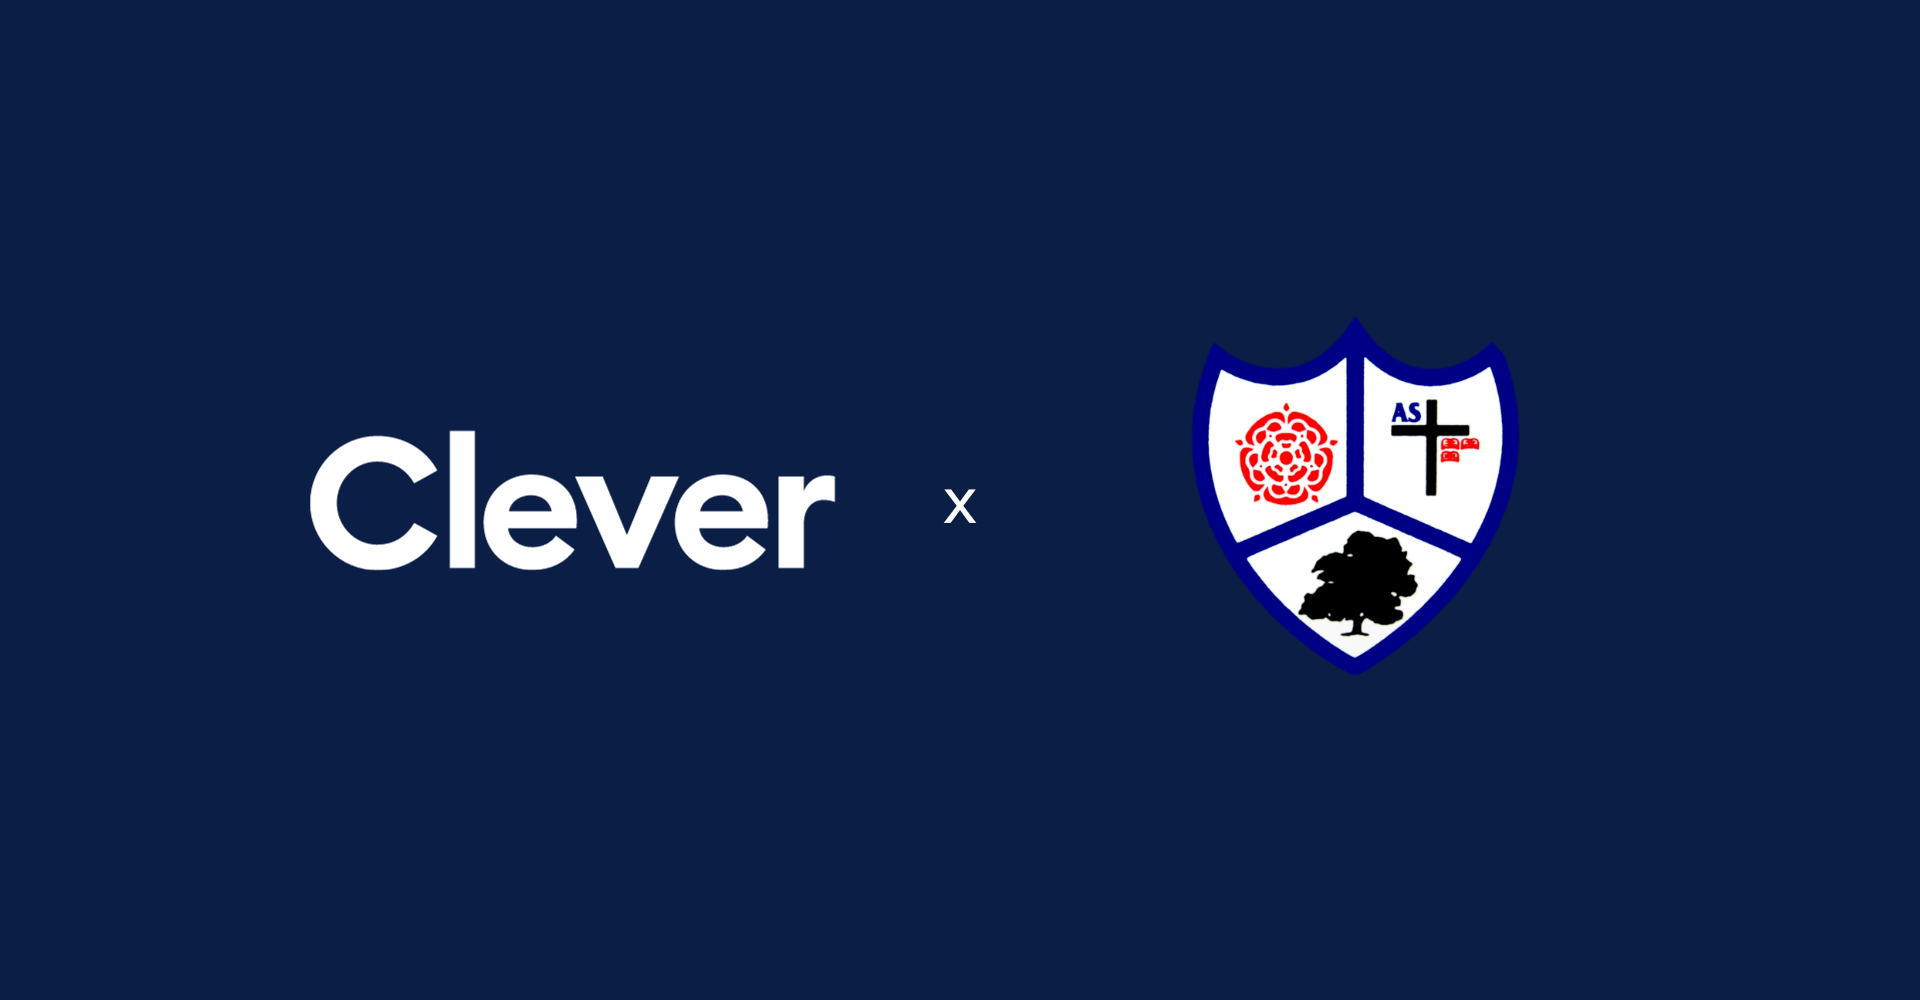 Designed image of Clever Logo and New Longton Primary's logo side by side on a dark blue background